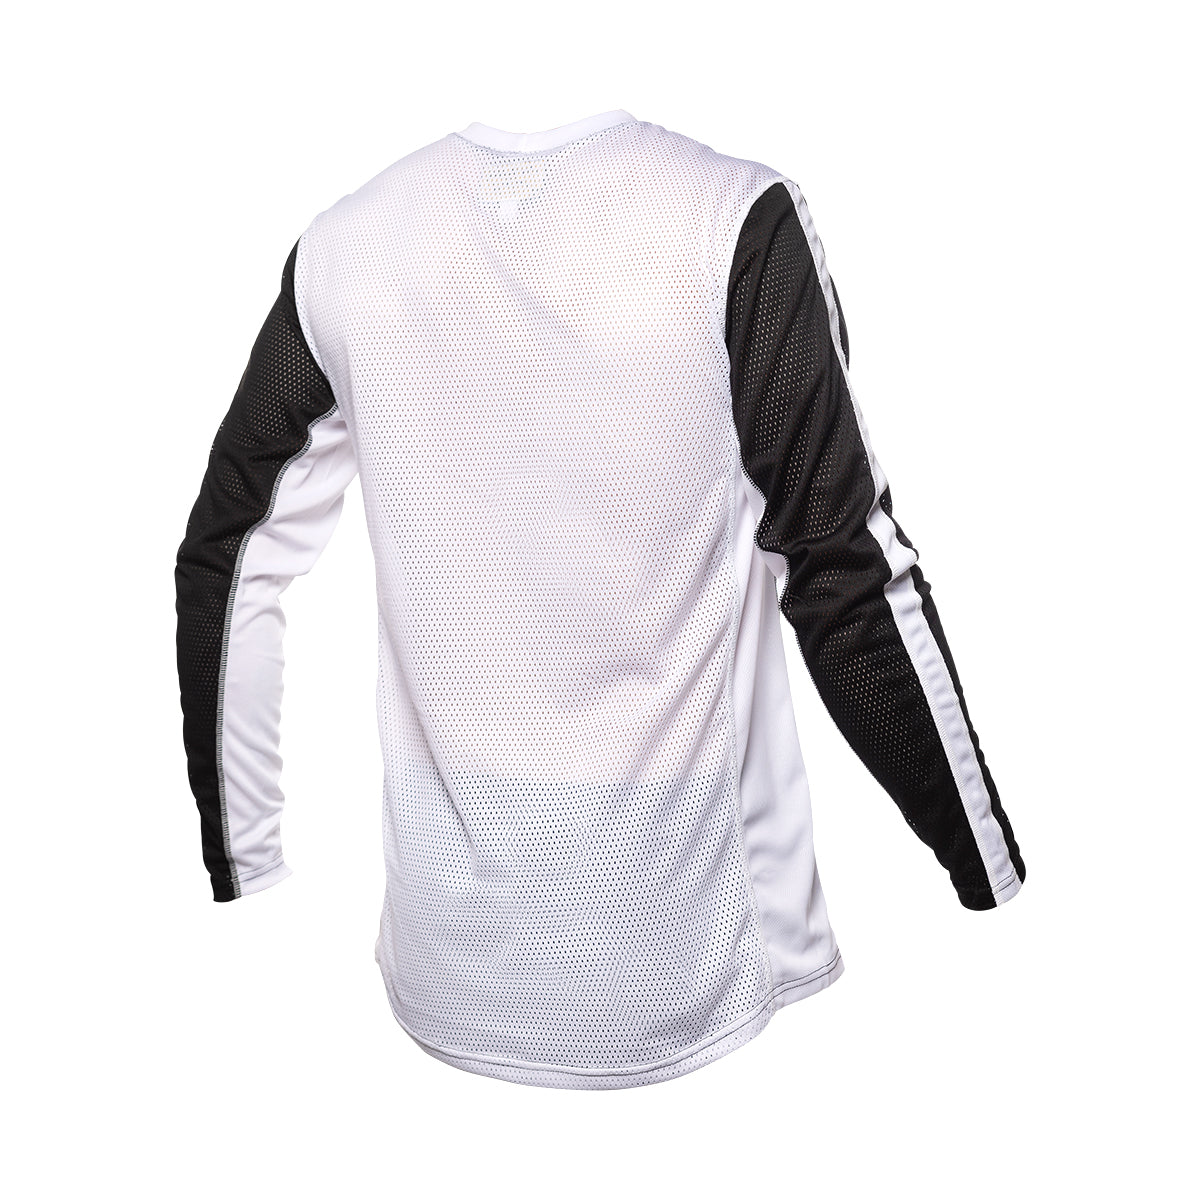 Grindhouse Waypoint Youth Jersey - Black/White